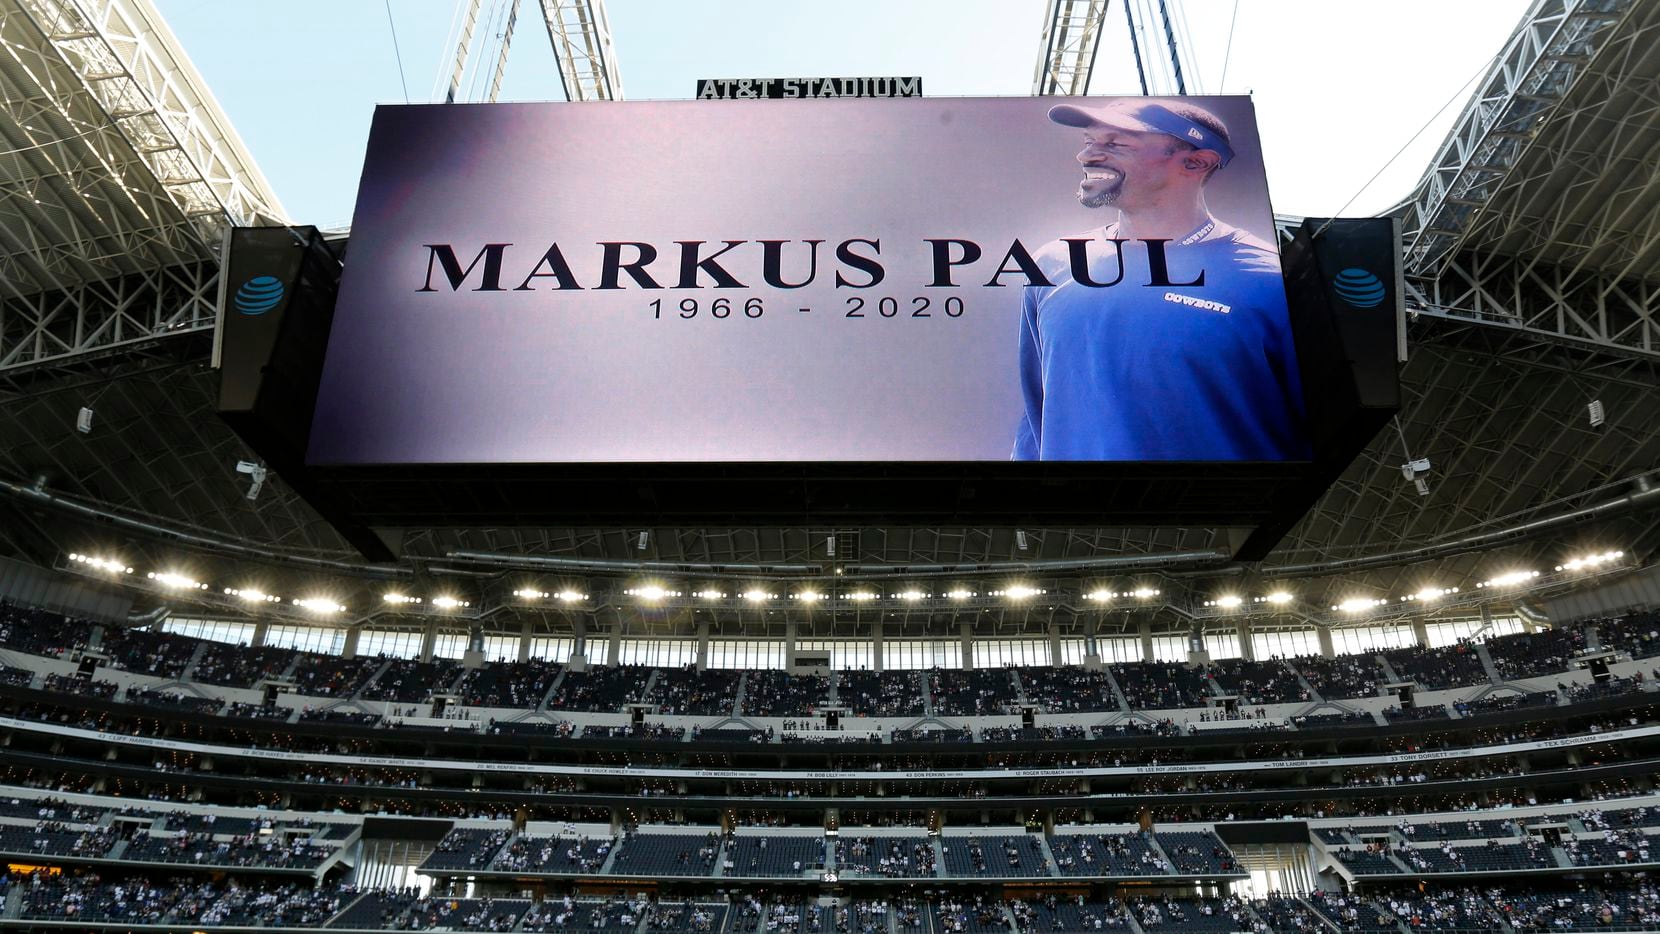 A moment of silence was held before the Washington Football Team game for Dallas Cowboys strength coach Markus Paul at AT&T Stadium in Arlington, Thursday, November 26, 2020. The Cowboys coach died unexpectedly this week.